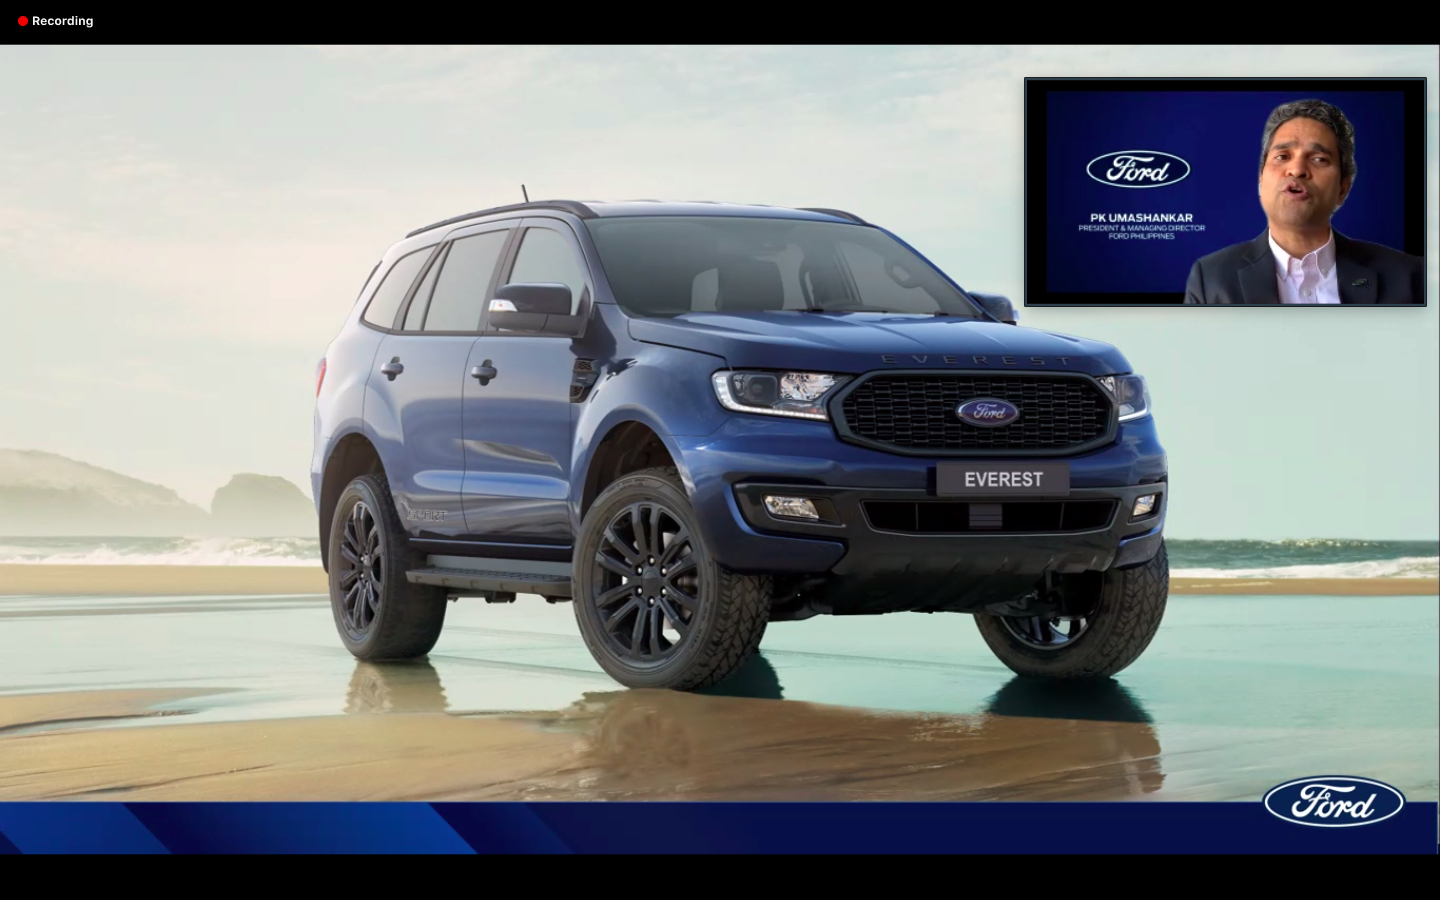 LOOK: The new Ford Everest Sport 2020 (what a beauty)